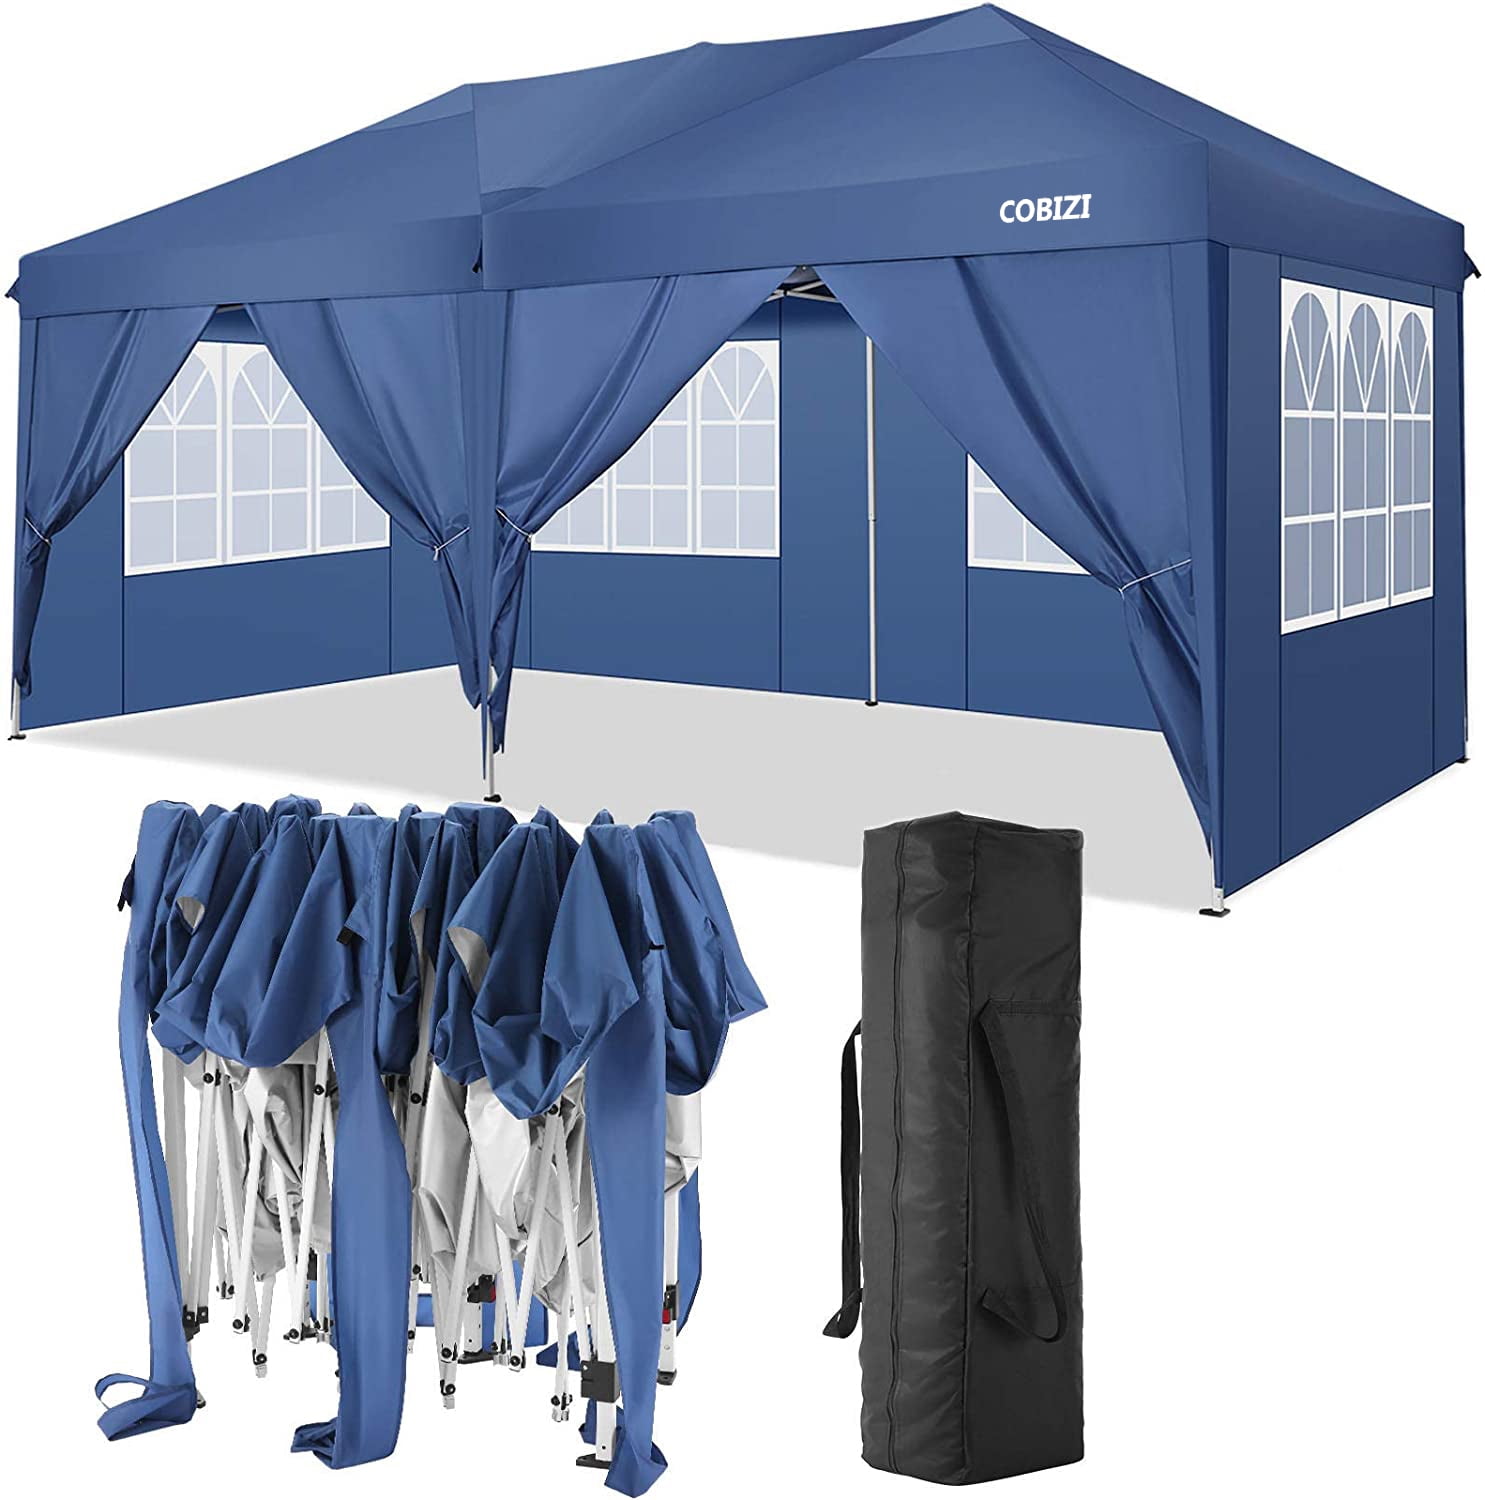 Oudoor Canopy Tent 10x10 Ft Gazebos Commercial Instant Shelter Tent 8 Stakes 4 Ropes Portable Waterproof Canopy Folding with 4 Removable Sidewalls Heavy Duty Event Tent Pavilion 